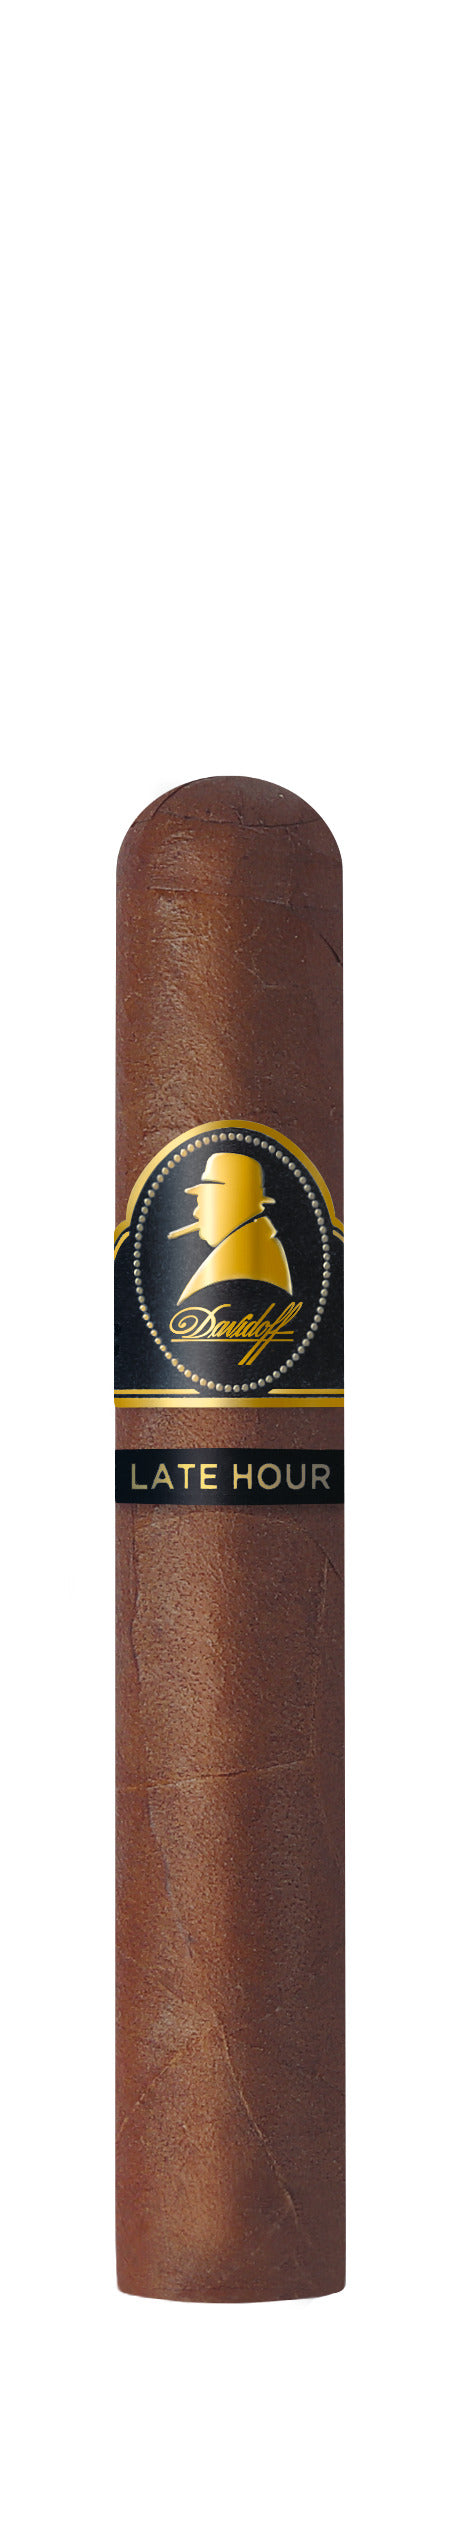 Davidoff Winston Churchill The Late Hour Robusto Featured Image